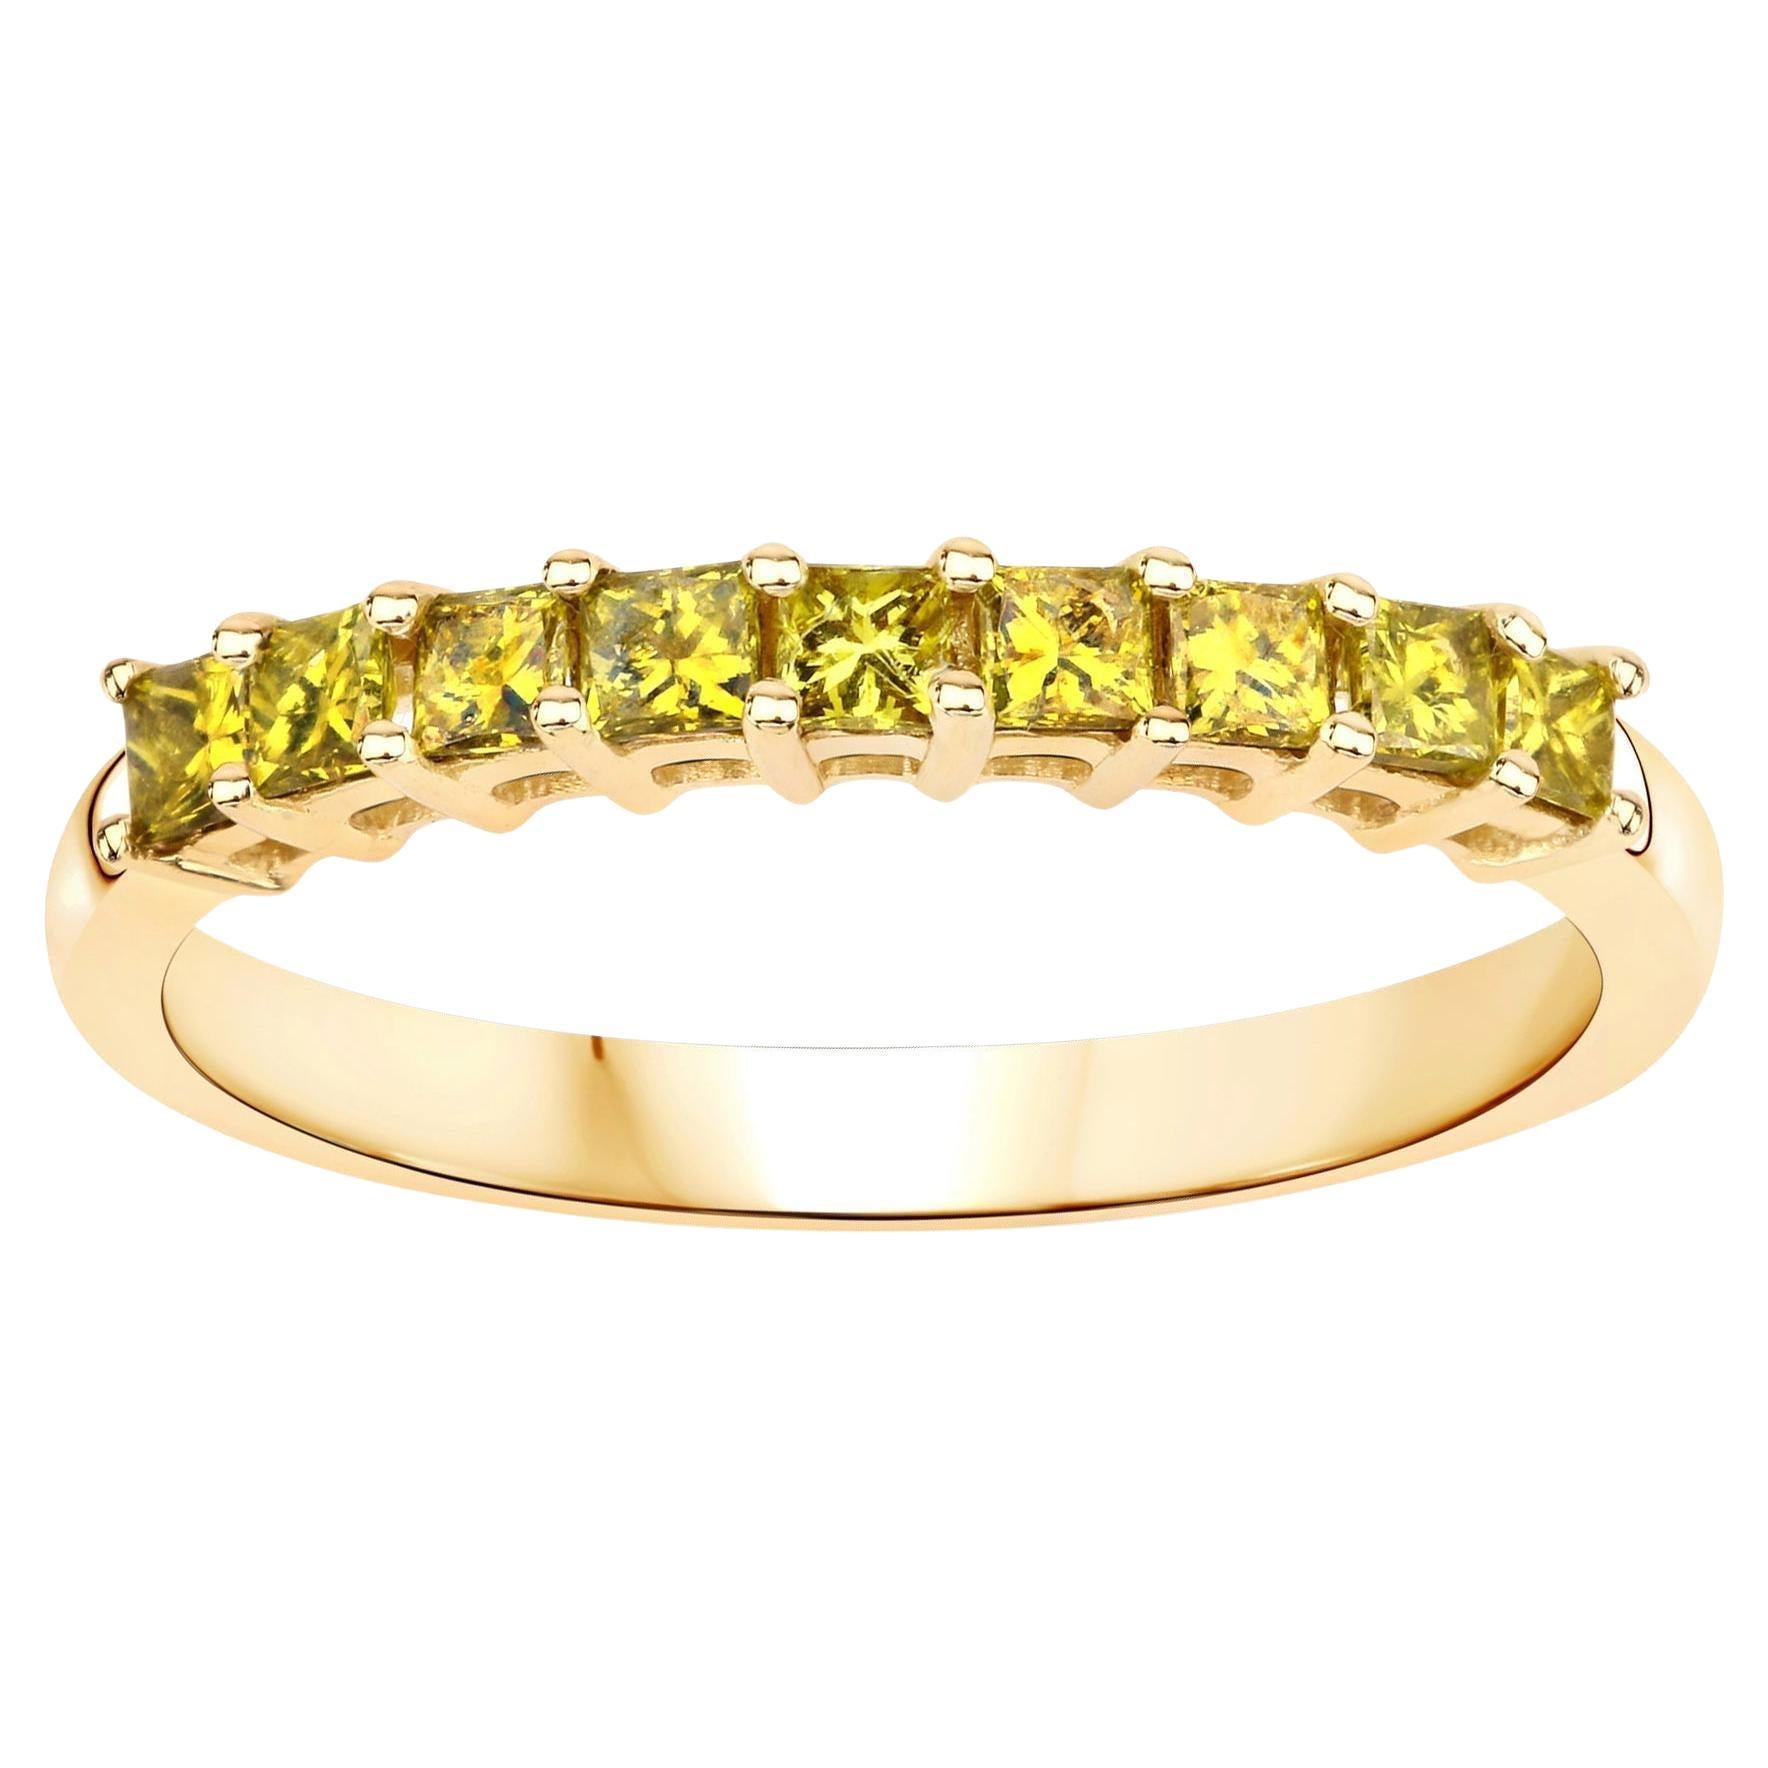 Natural Yellow Diamond Band Ring 0.45 Carats 14K Yellow Gold In Excellent Condition For Sale In Laguna Niguel, CA